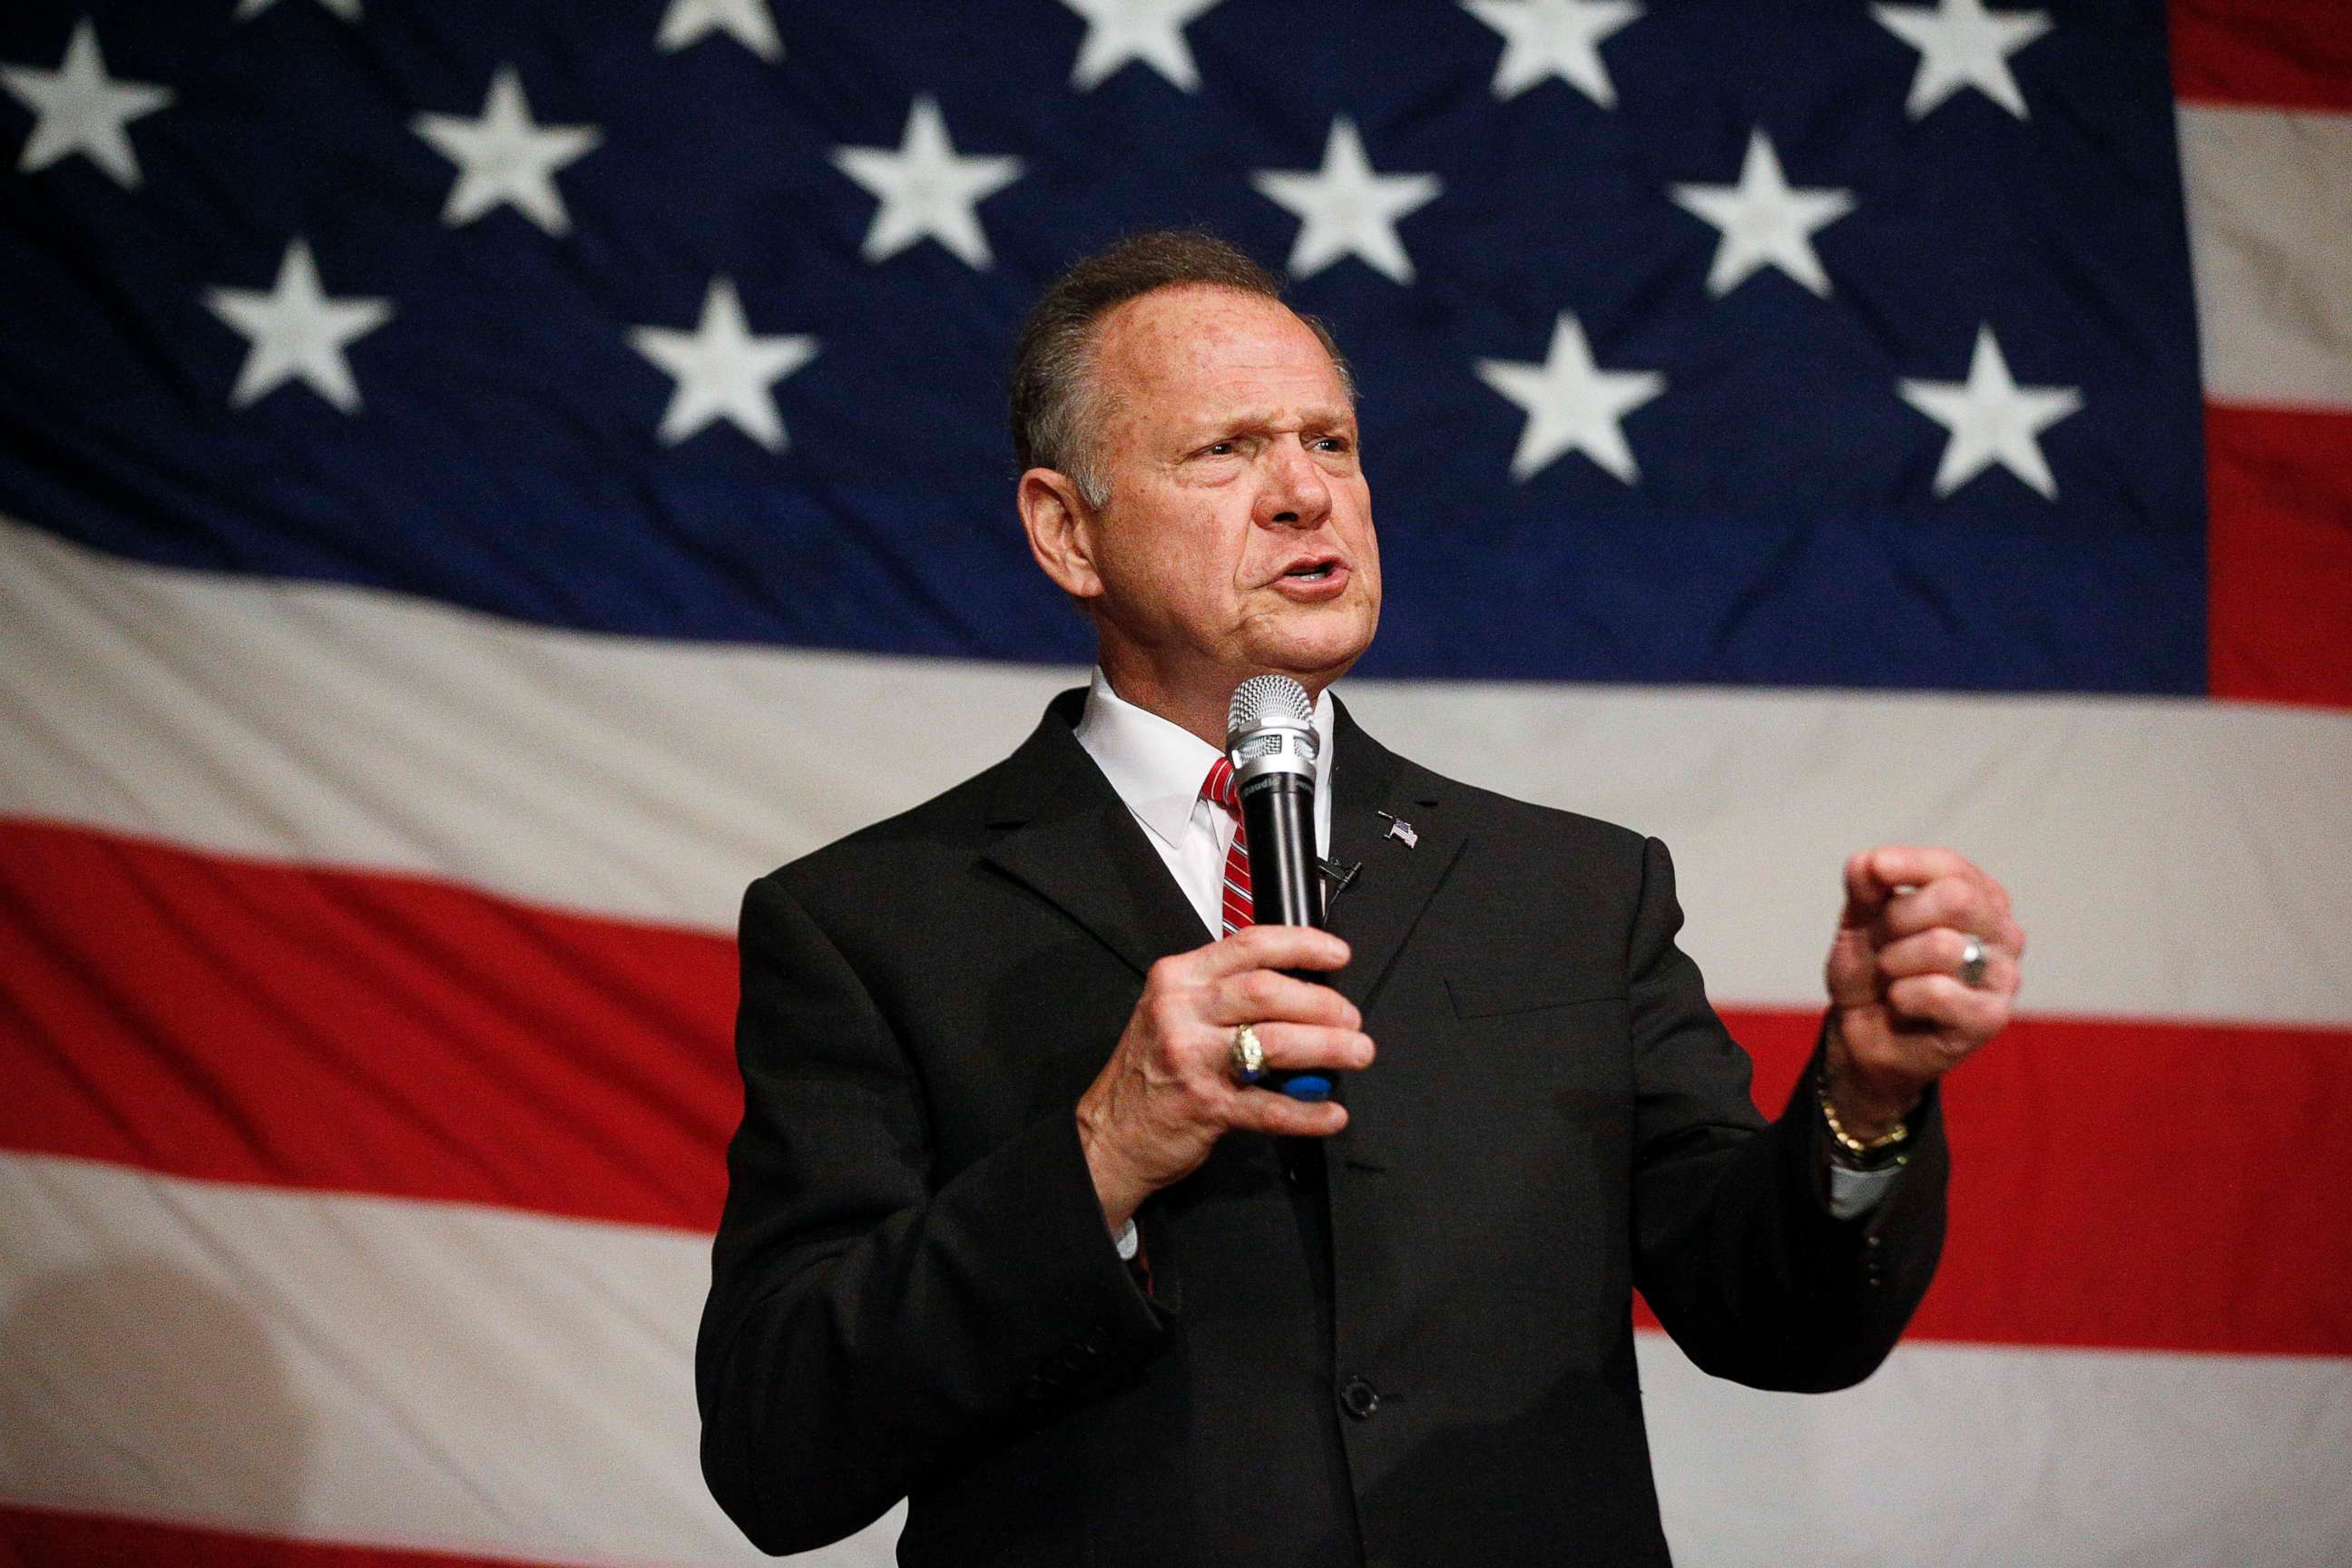 PHOTO: Former Alabama Chief Justice and U.S. Senate candidate Roy Moore speaks at a campaign rally, Dec. 5, 2017, in Fairhope, Ala.